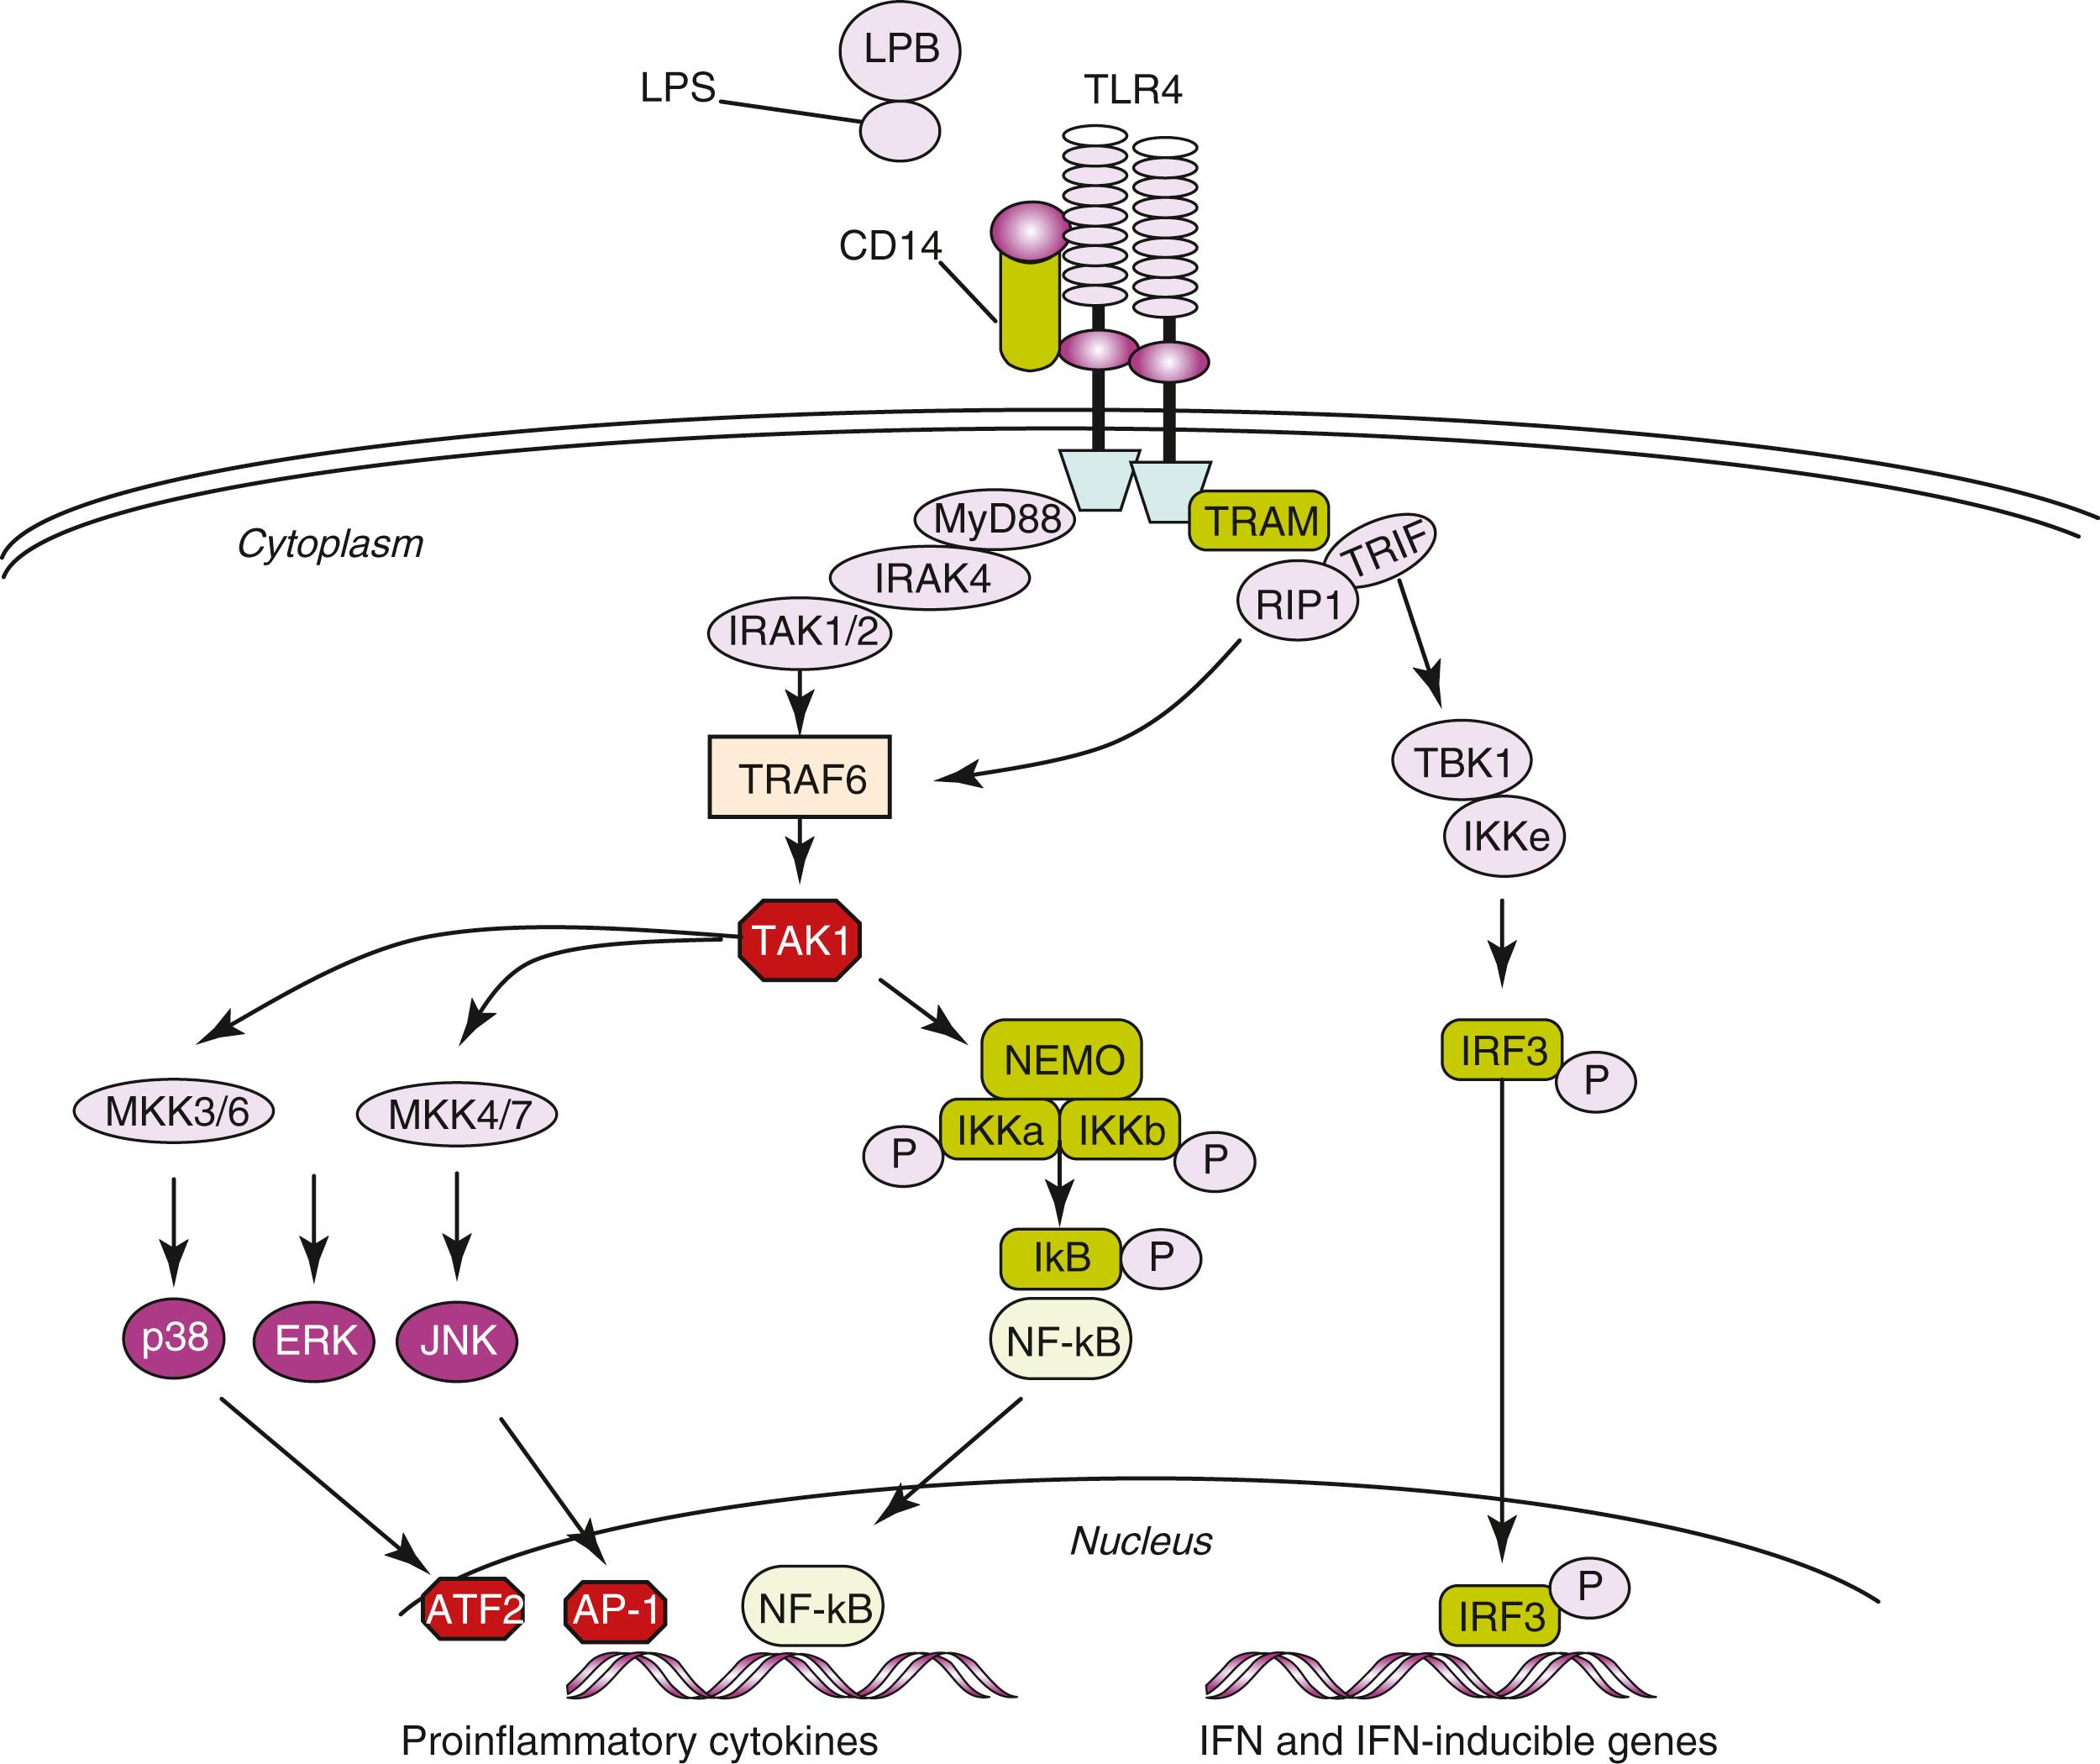 Fig. 4.3, Toll-like receptors signaling pathways. MyD88-dependent and MyD88-independent activation of TLR4. Lipopolysaccharide (LPS) binds to the CD14 molecule present on phagocyte surface. The LPS-CD14 complex associates to TLR4 for the subsequent intracellular signaling. The circulating lipopolysaccharide binding protein (LPB) binds LPS in extracellular fluids forming a complex that facilitates LPS binding to CD14. The MyD88-dependent signaling pathway induces the early-phase NF-κB and mitogen-activated protein kinase (MAPK) activation that controls the induction of proinflammatory cytokines (see text). The MyD88-independent pathway activates IFN regulatory factor 3 (IRF3), which is required for the induction of interferon (IFN)-β and IFN-inducible genes. This latter pathway also mediates the late-phase NF-κB and MAPK activation through the activation of TRAF-6 and TAK1 .